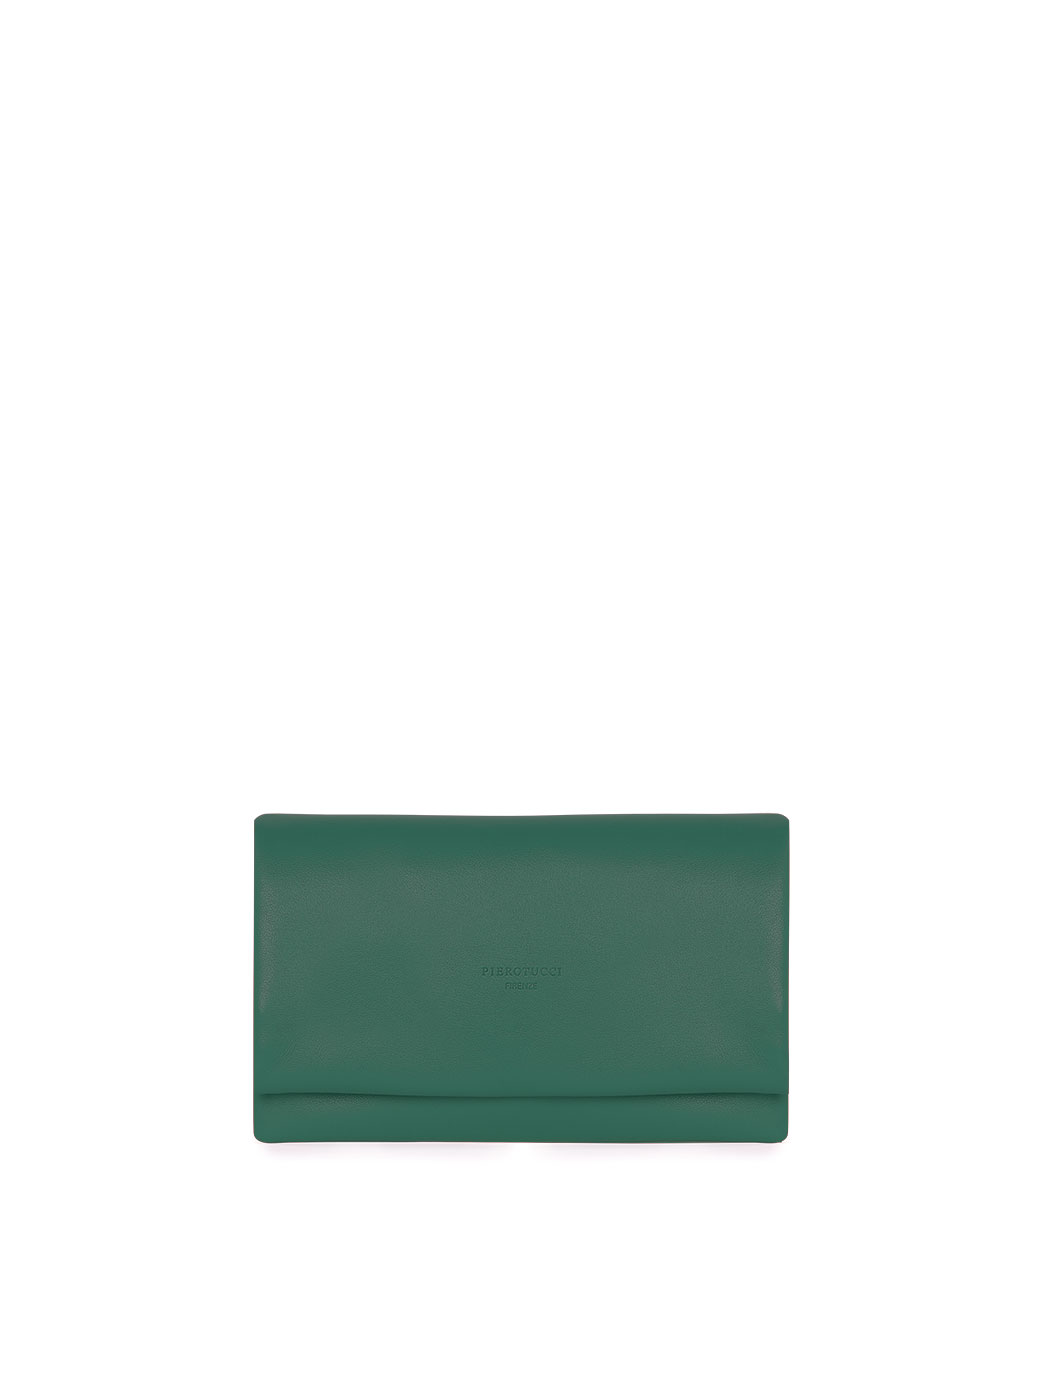 Prom Clutch Bag | The Store Bags